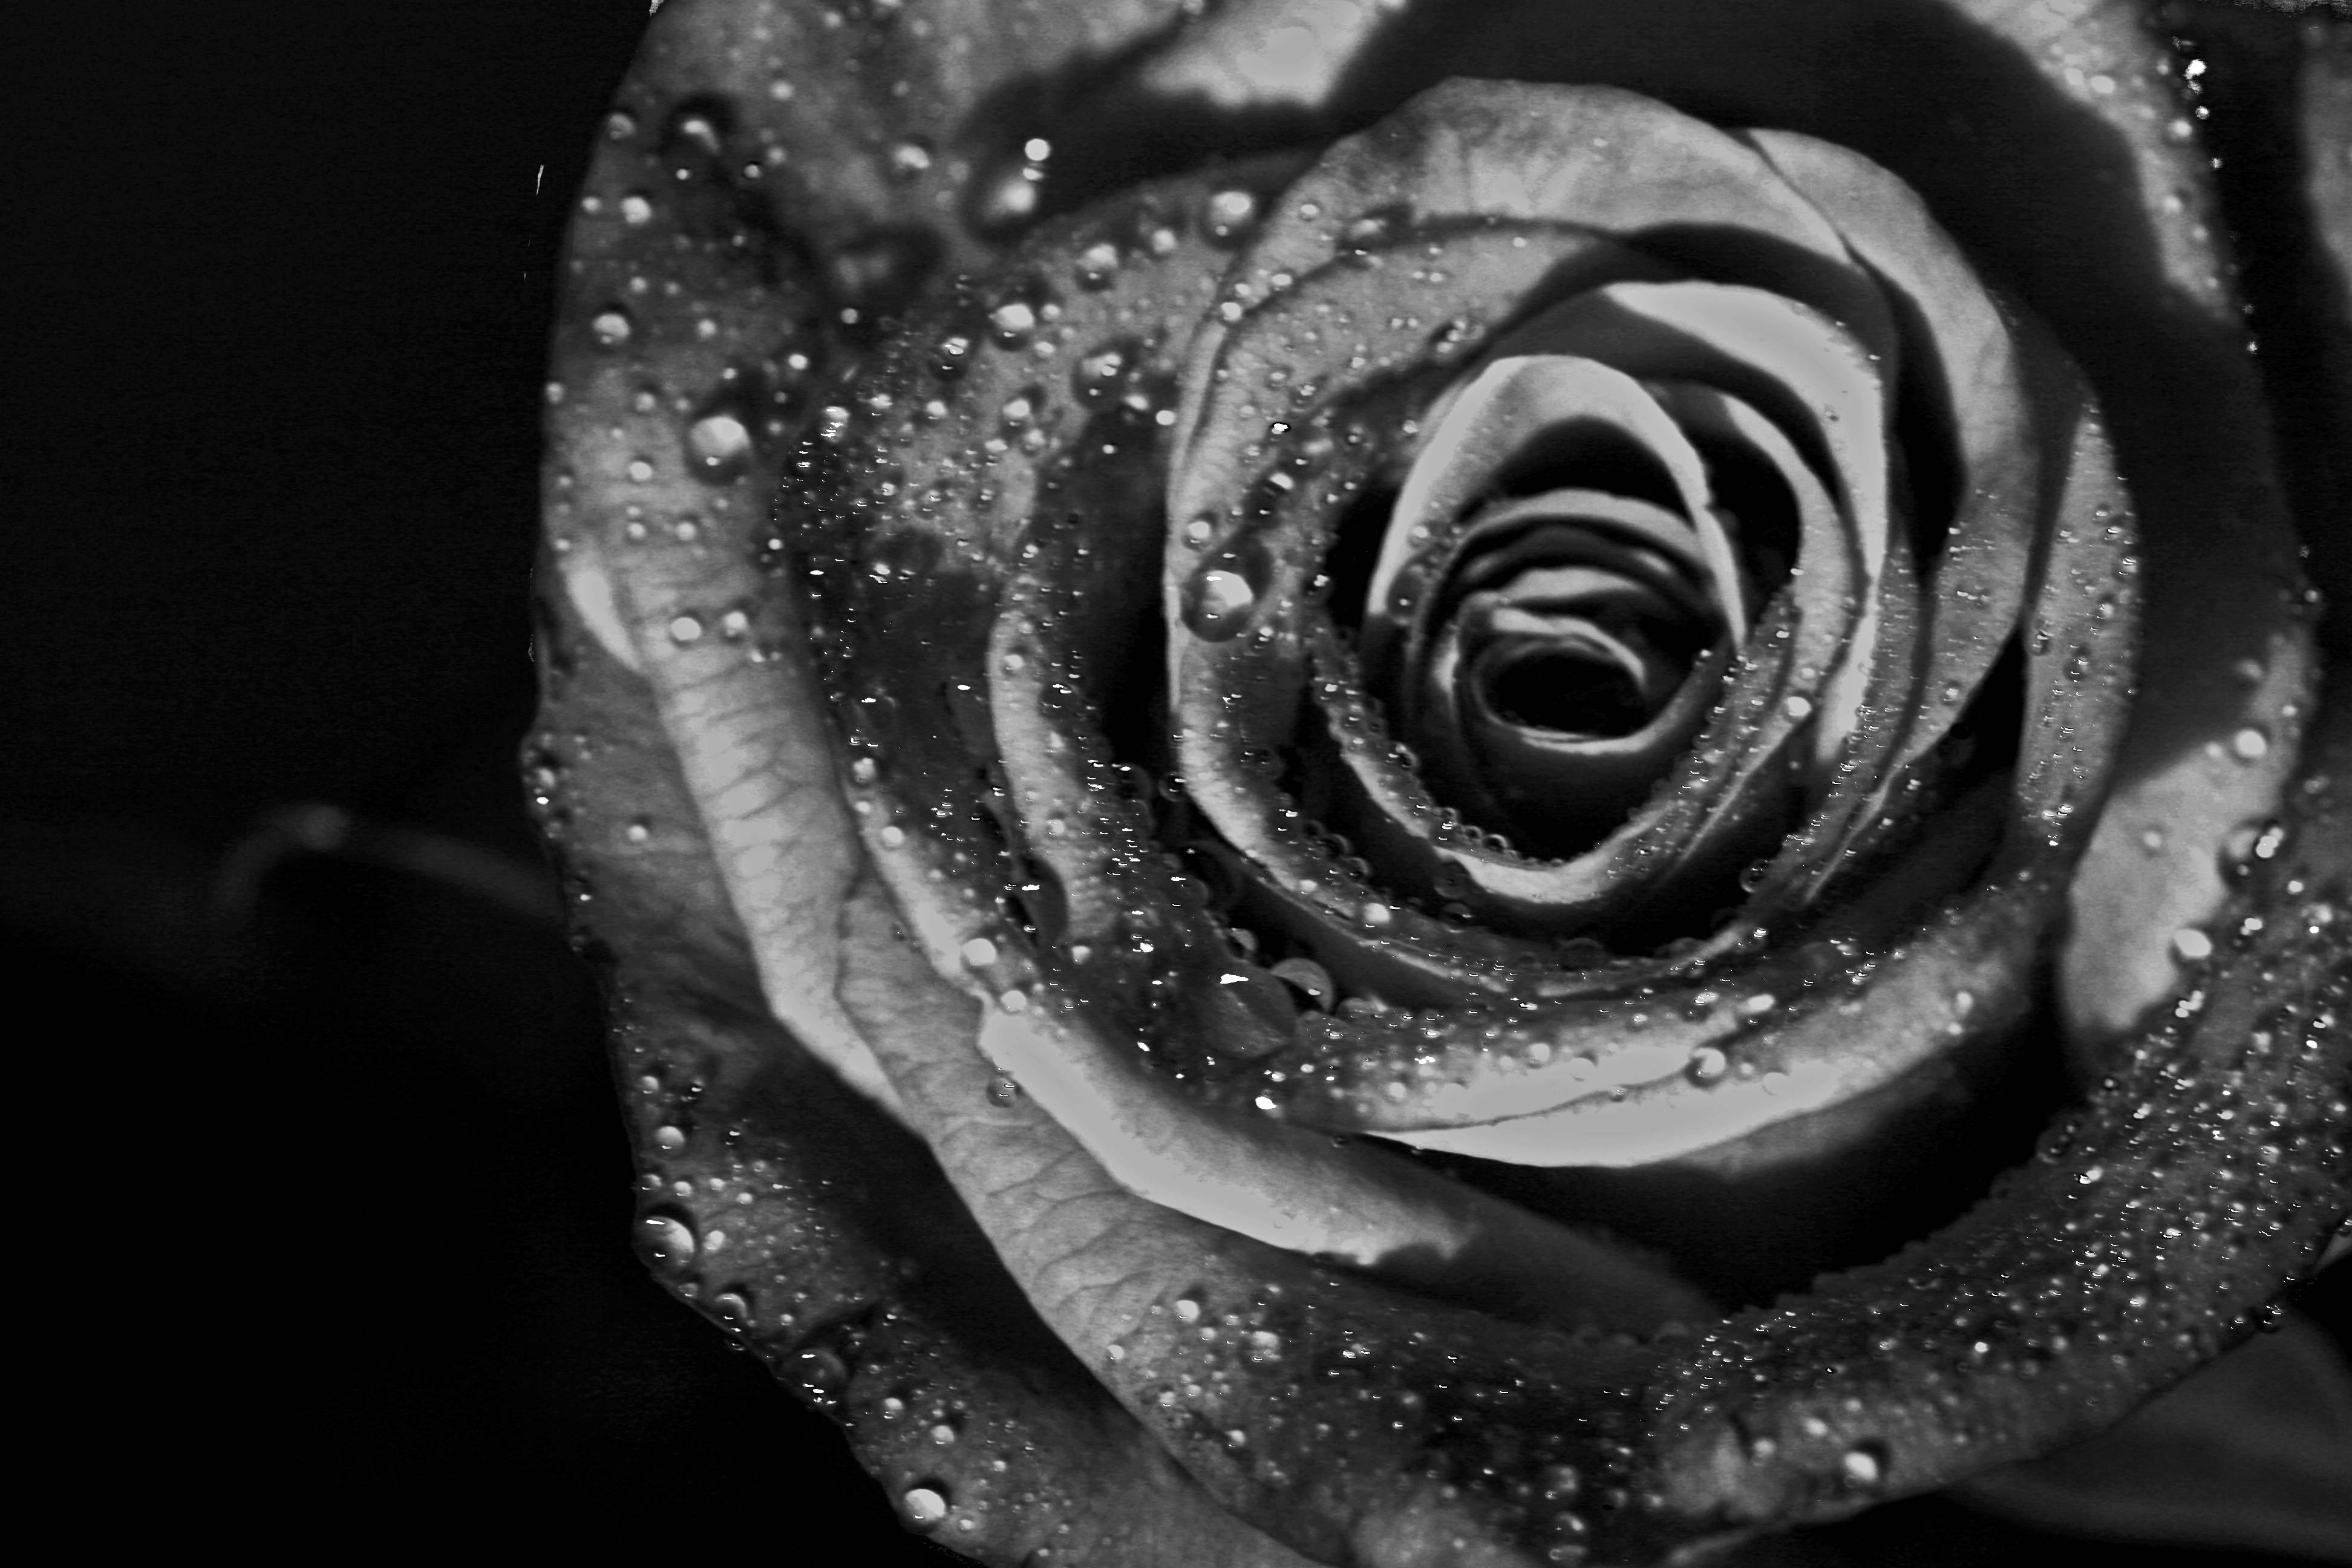 Black and White Rose Wallpapers - Top Free Black and White Rose Backgrounds  - WallpaperAccess